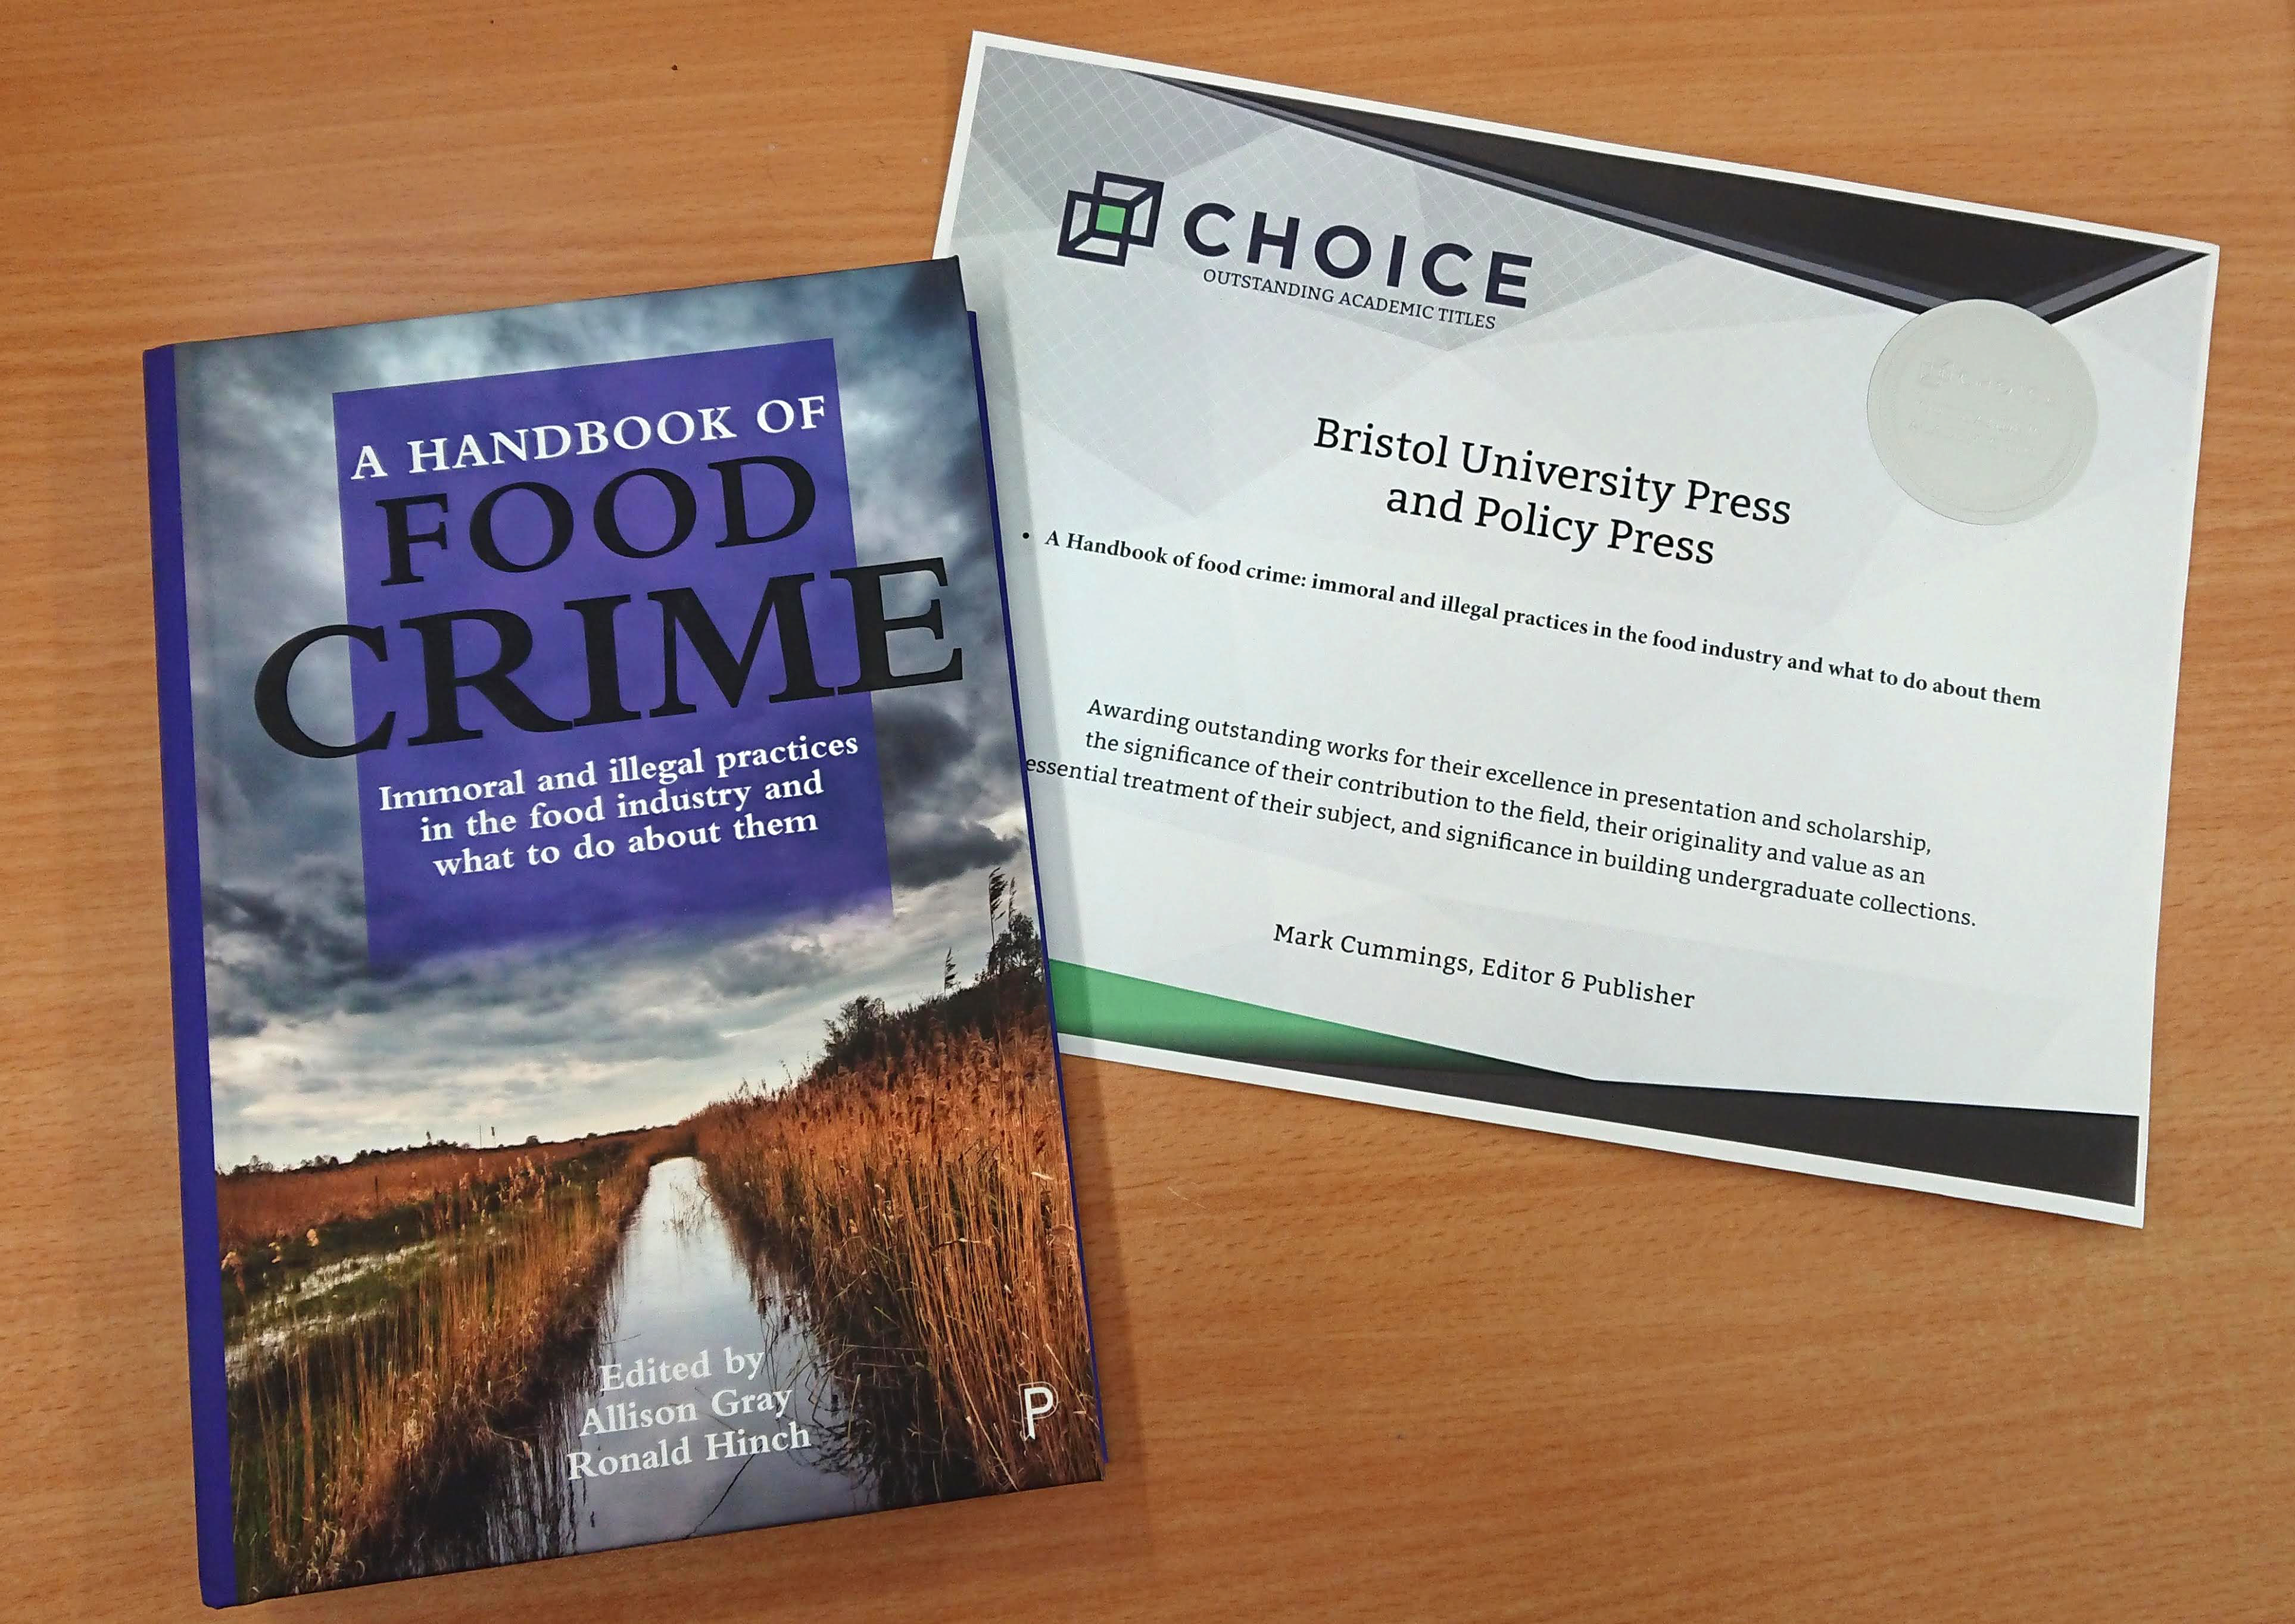 The handbook of food crime wins Choice Outstanding Academic Title award